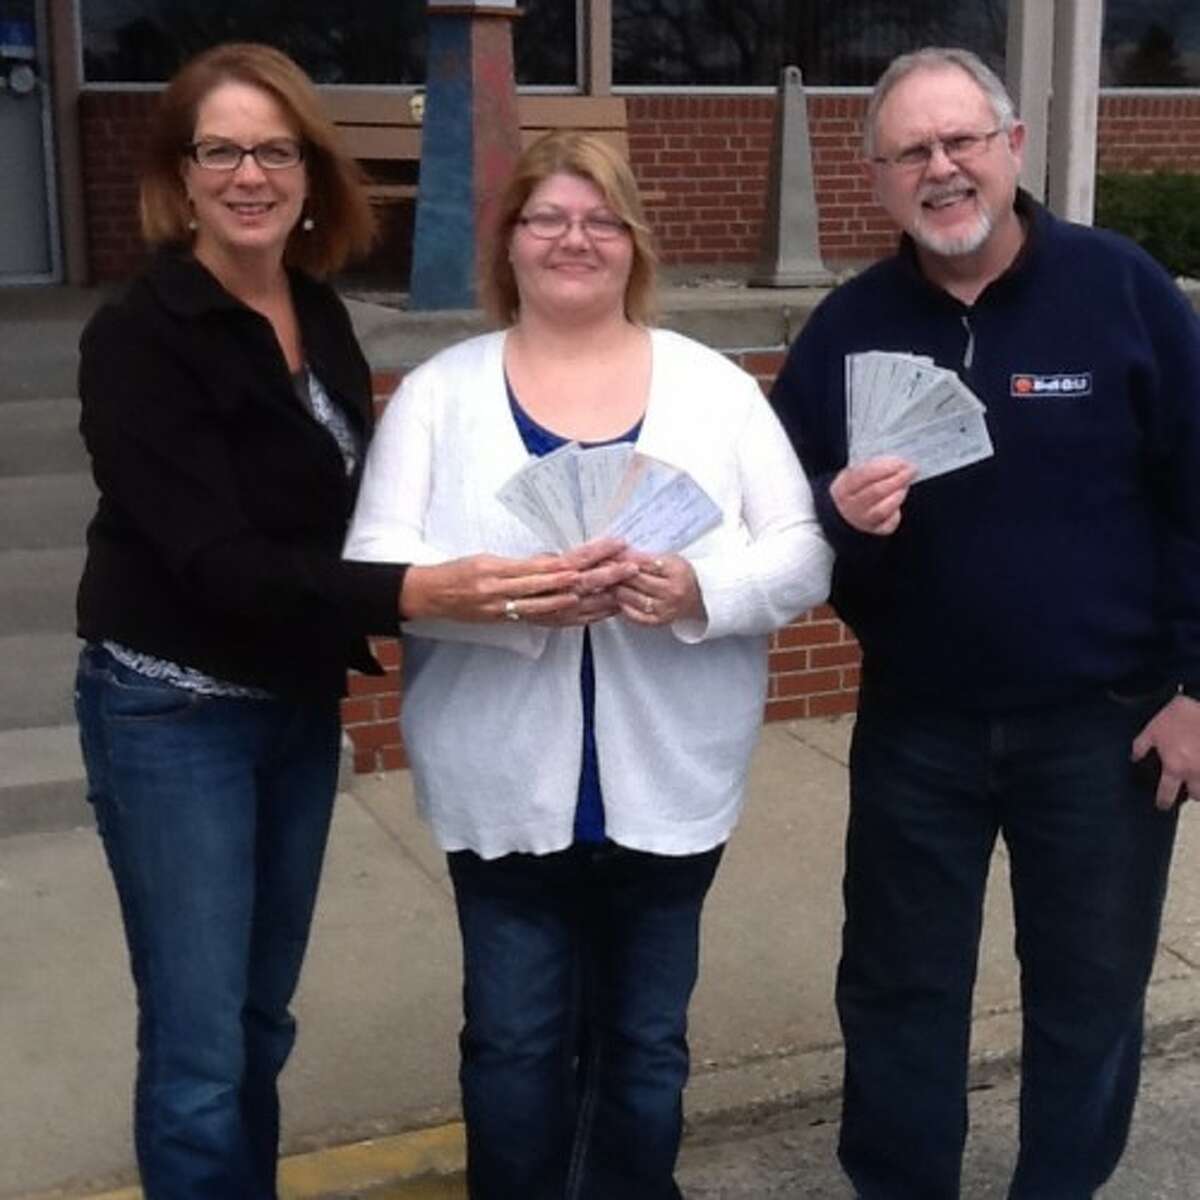 Judy Crockett, co-founder of 100 Women Who Care Manistee County, poses with Angela Beneke and Mike Woroniak, of StonesHouse Recovery of Manistee County, as they fan out checks donated to StonesHouse through the care group's second quarter meeting last week. (Courtesy photo)